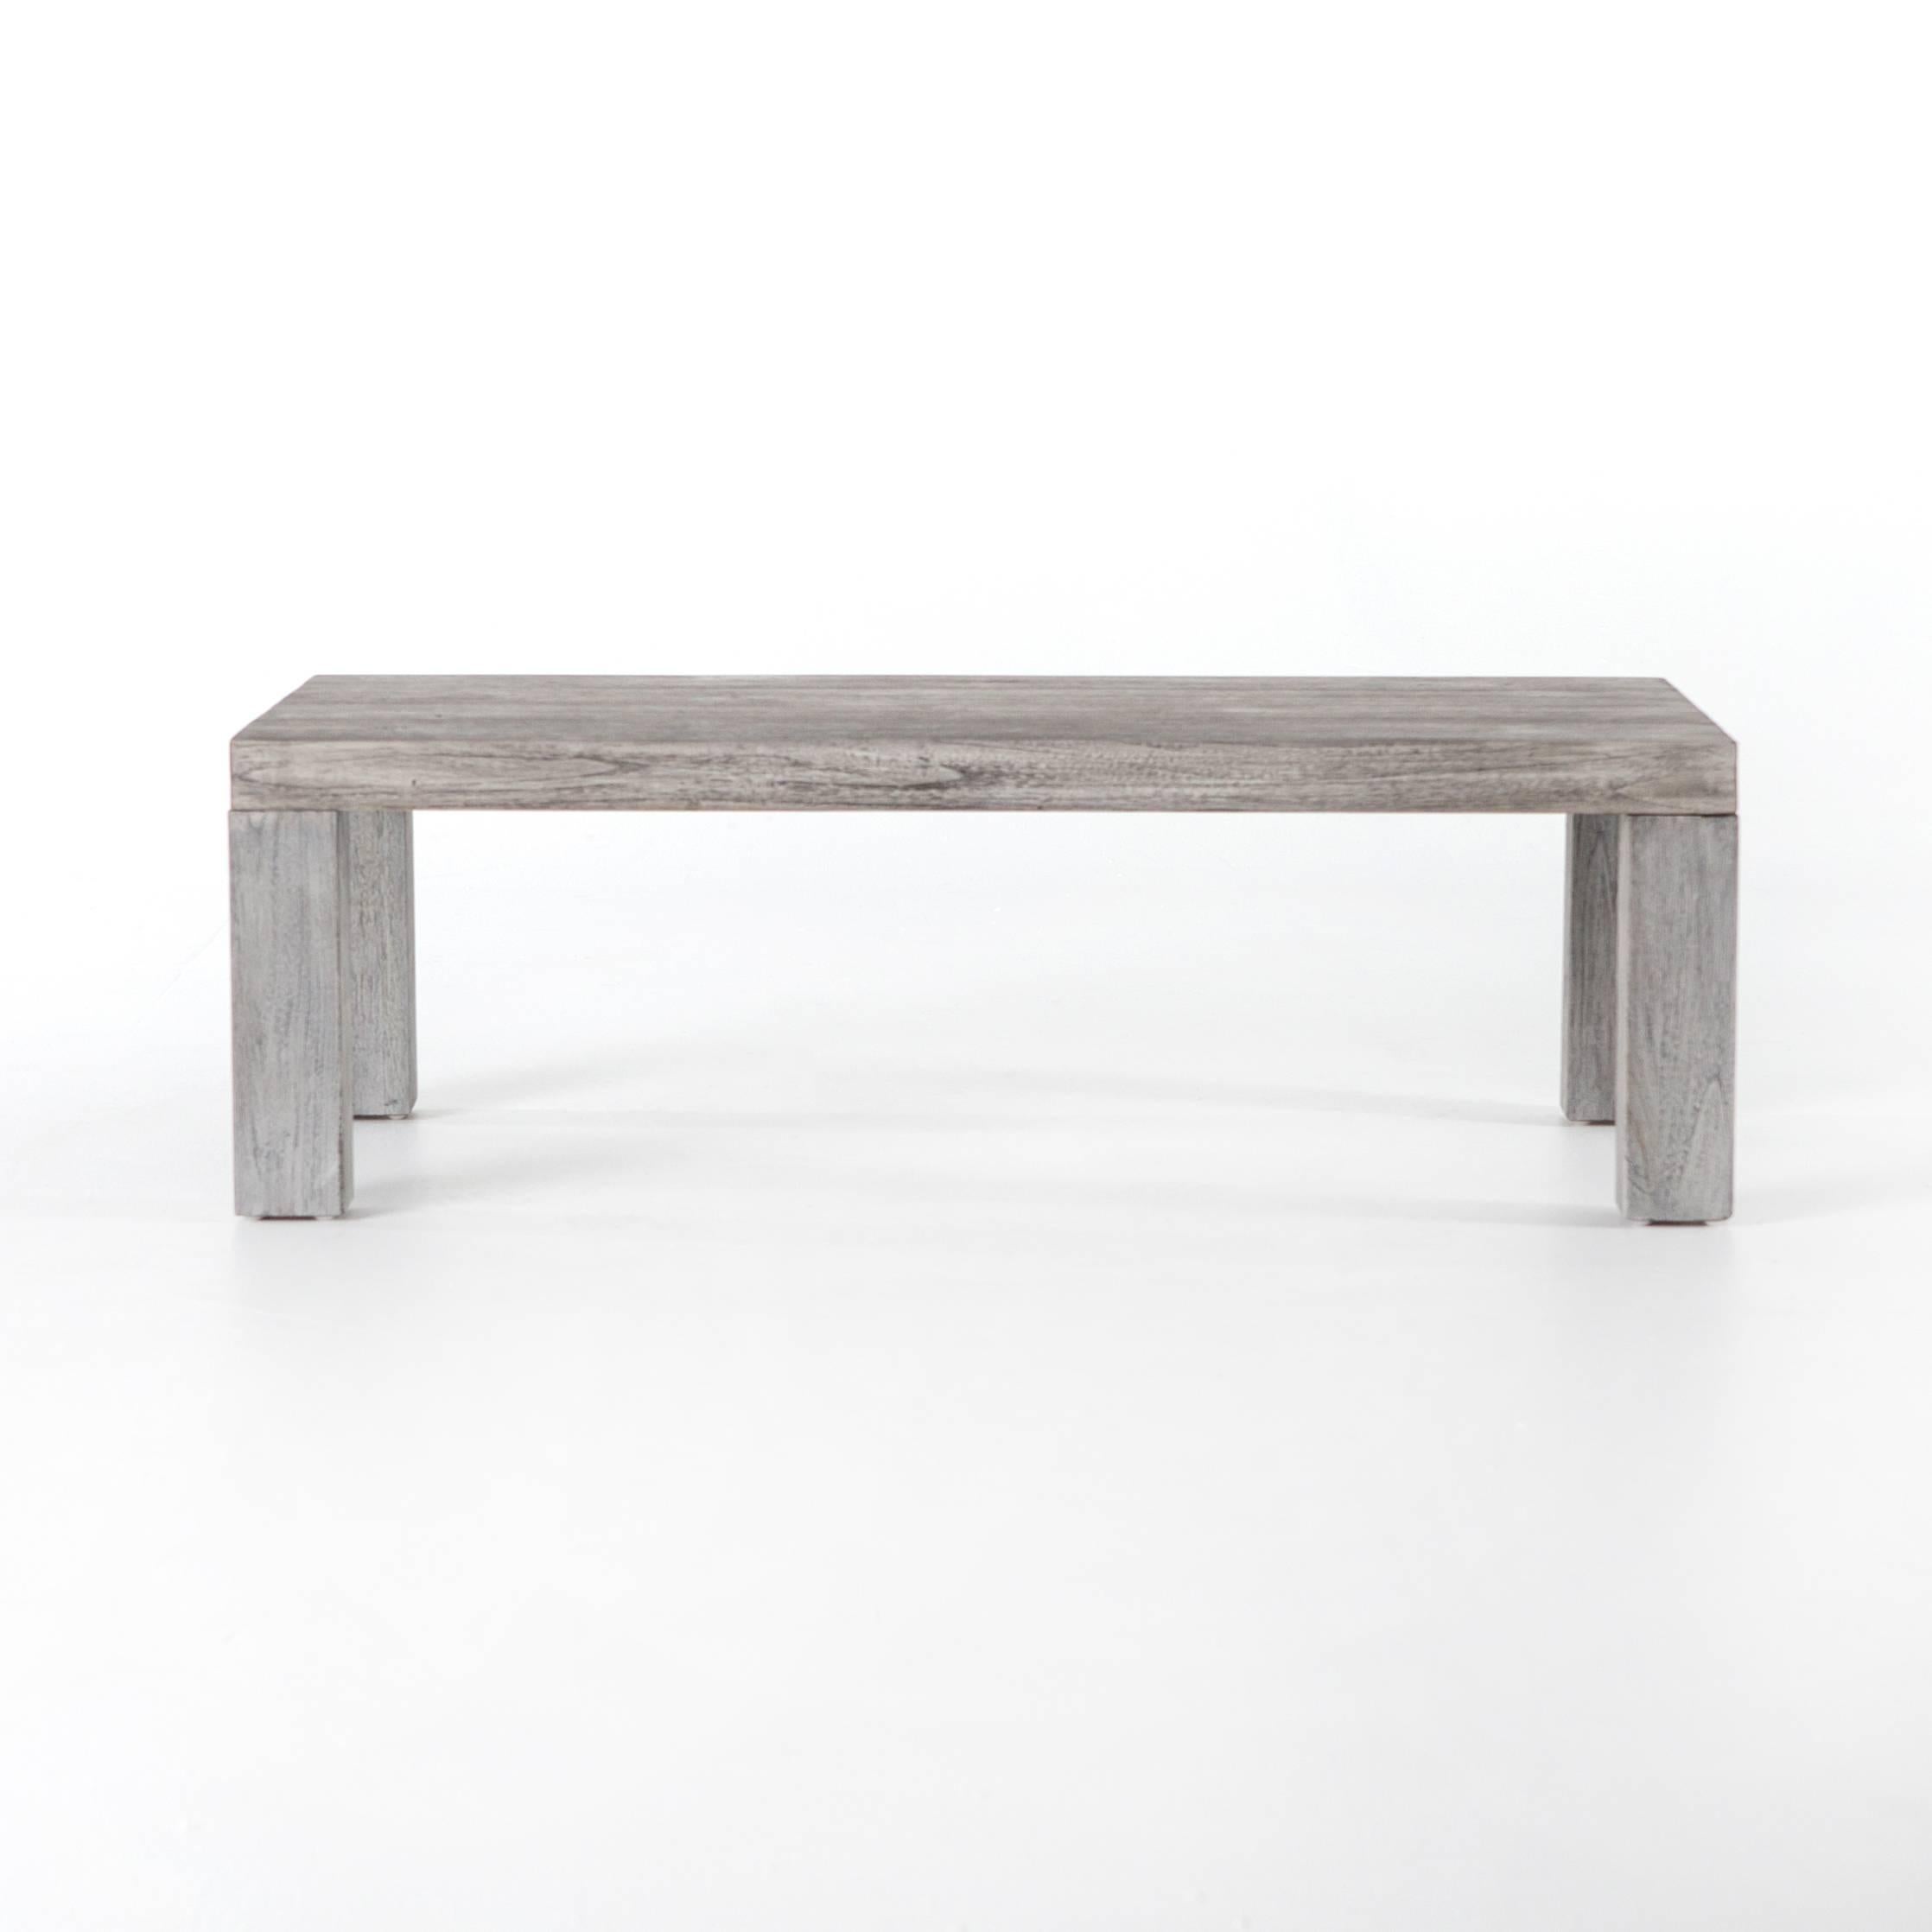 Modern coffee table, teakwood is fashioned into a clean-lined coffee table and weathered to a natural grey. Indoor, outdoor.
Dimensions: W 48